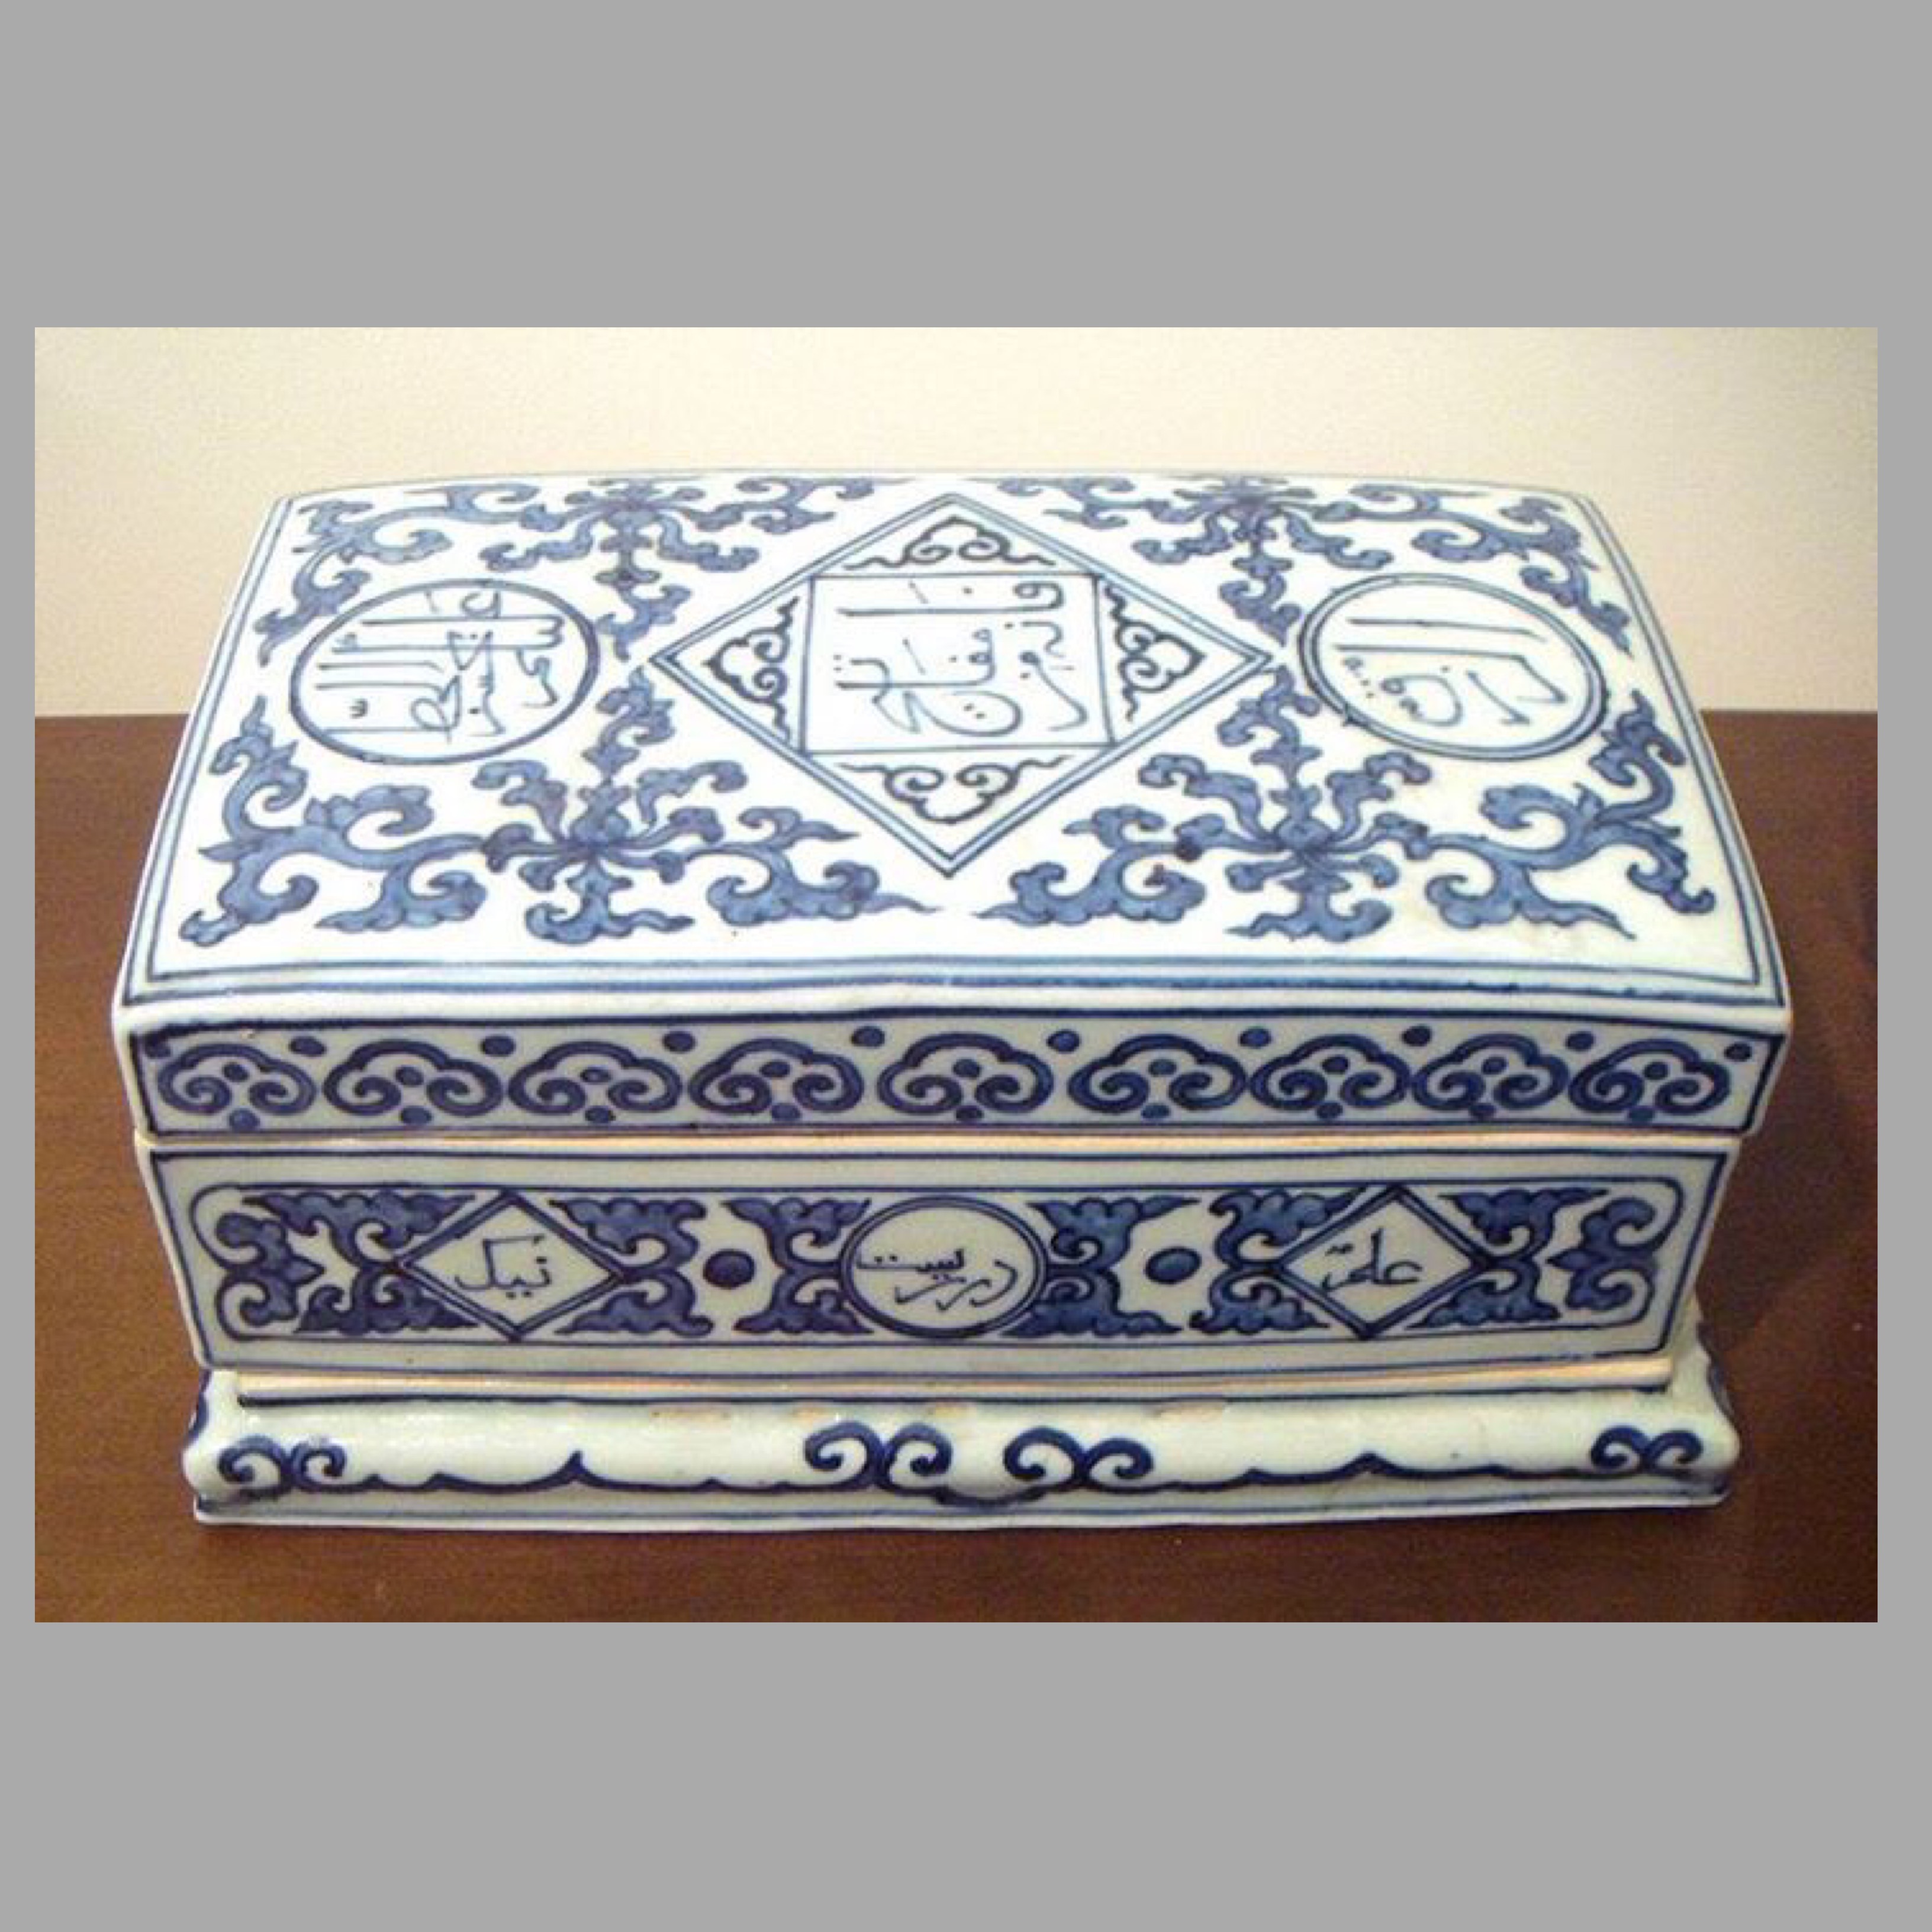 Ming Dynasty porcelain box, with Arabic and Persian inscriptions, Zhengde (1506-1521) CC BY-SA 3.0